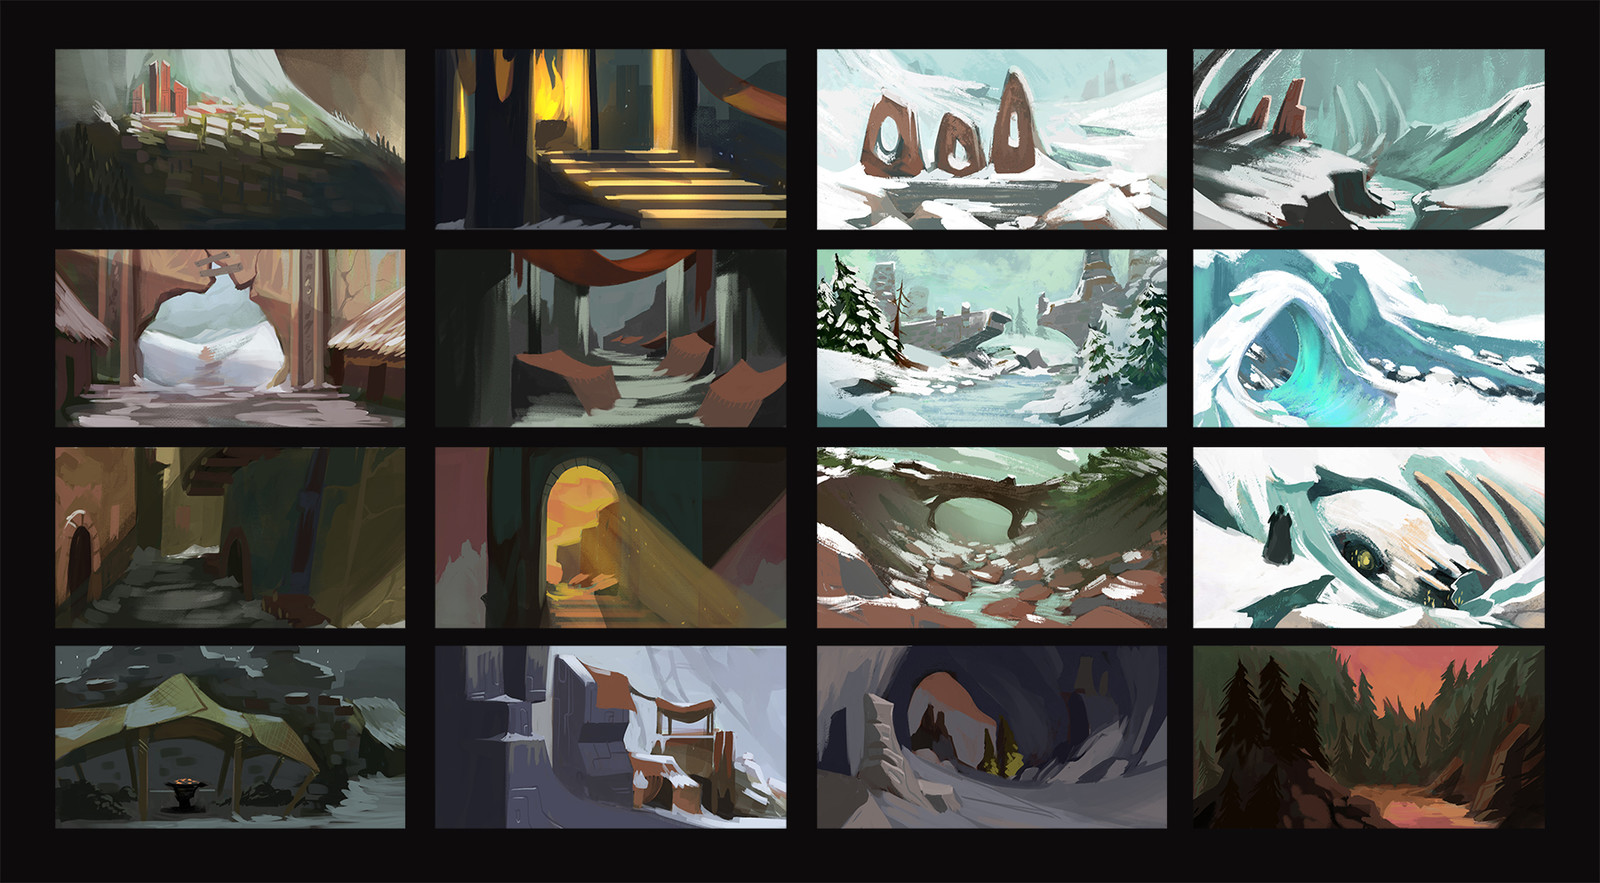 Environment thumbs (City/Ice plains)